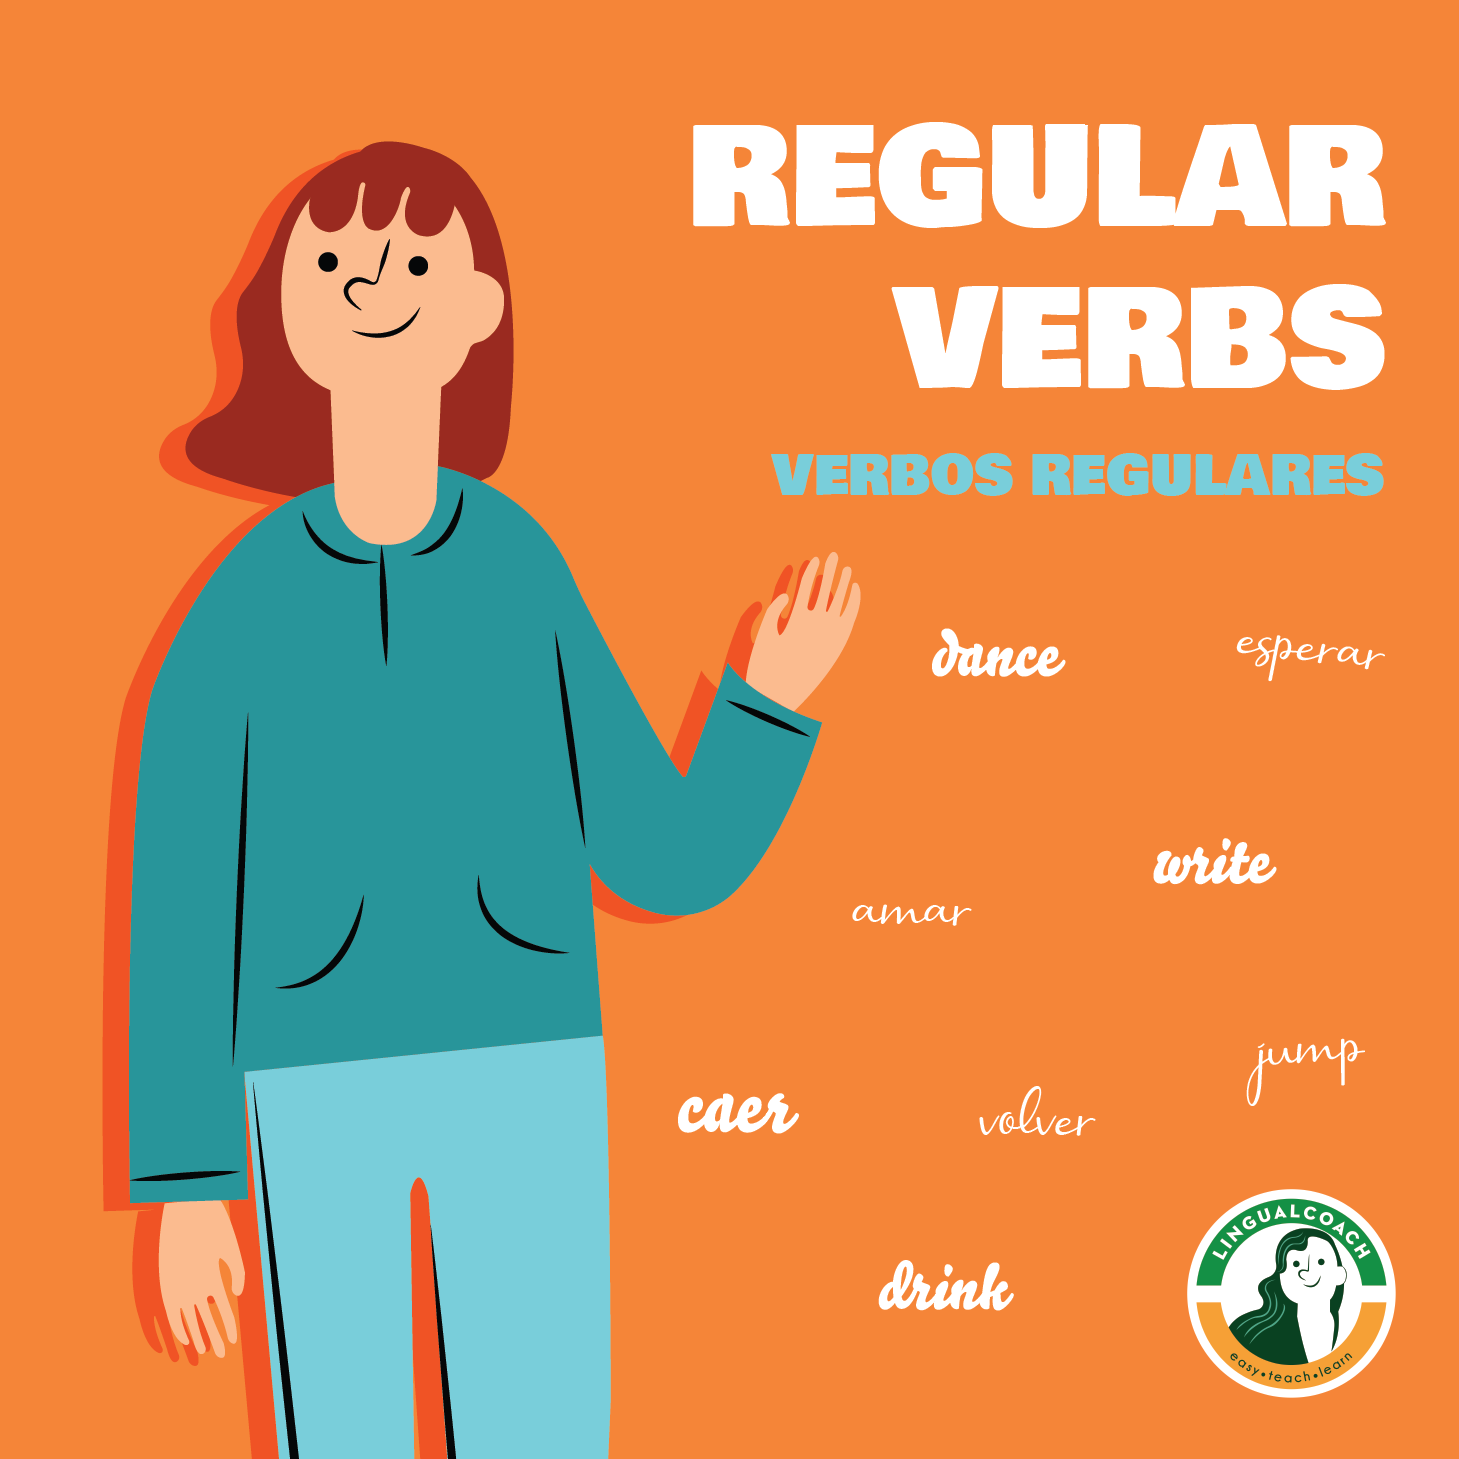 Spanish Regulars Verbs (Verbos Regulares) - Practices and quizzes.